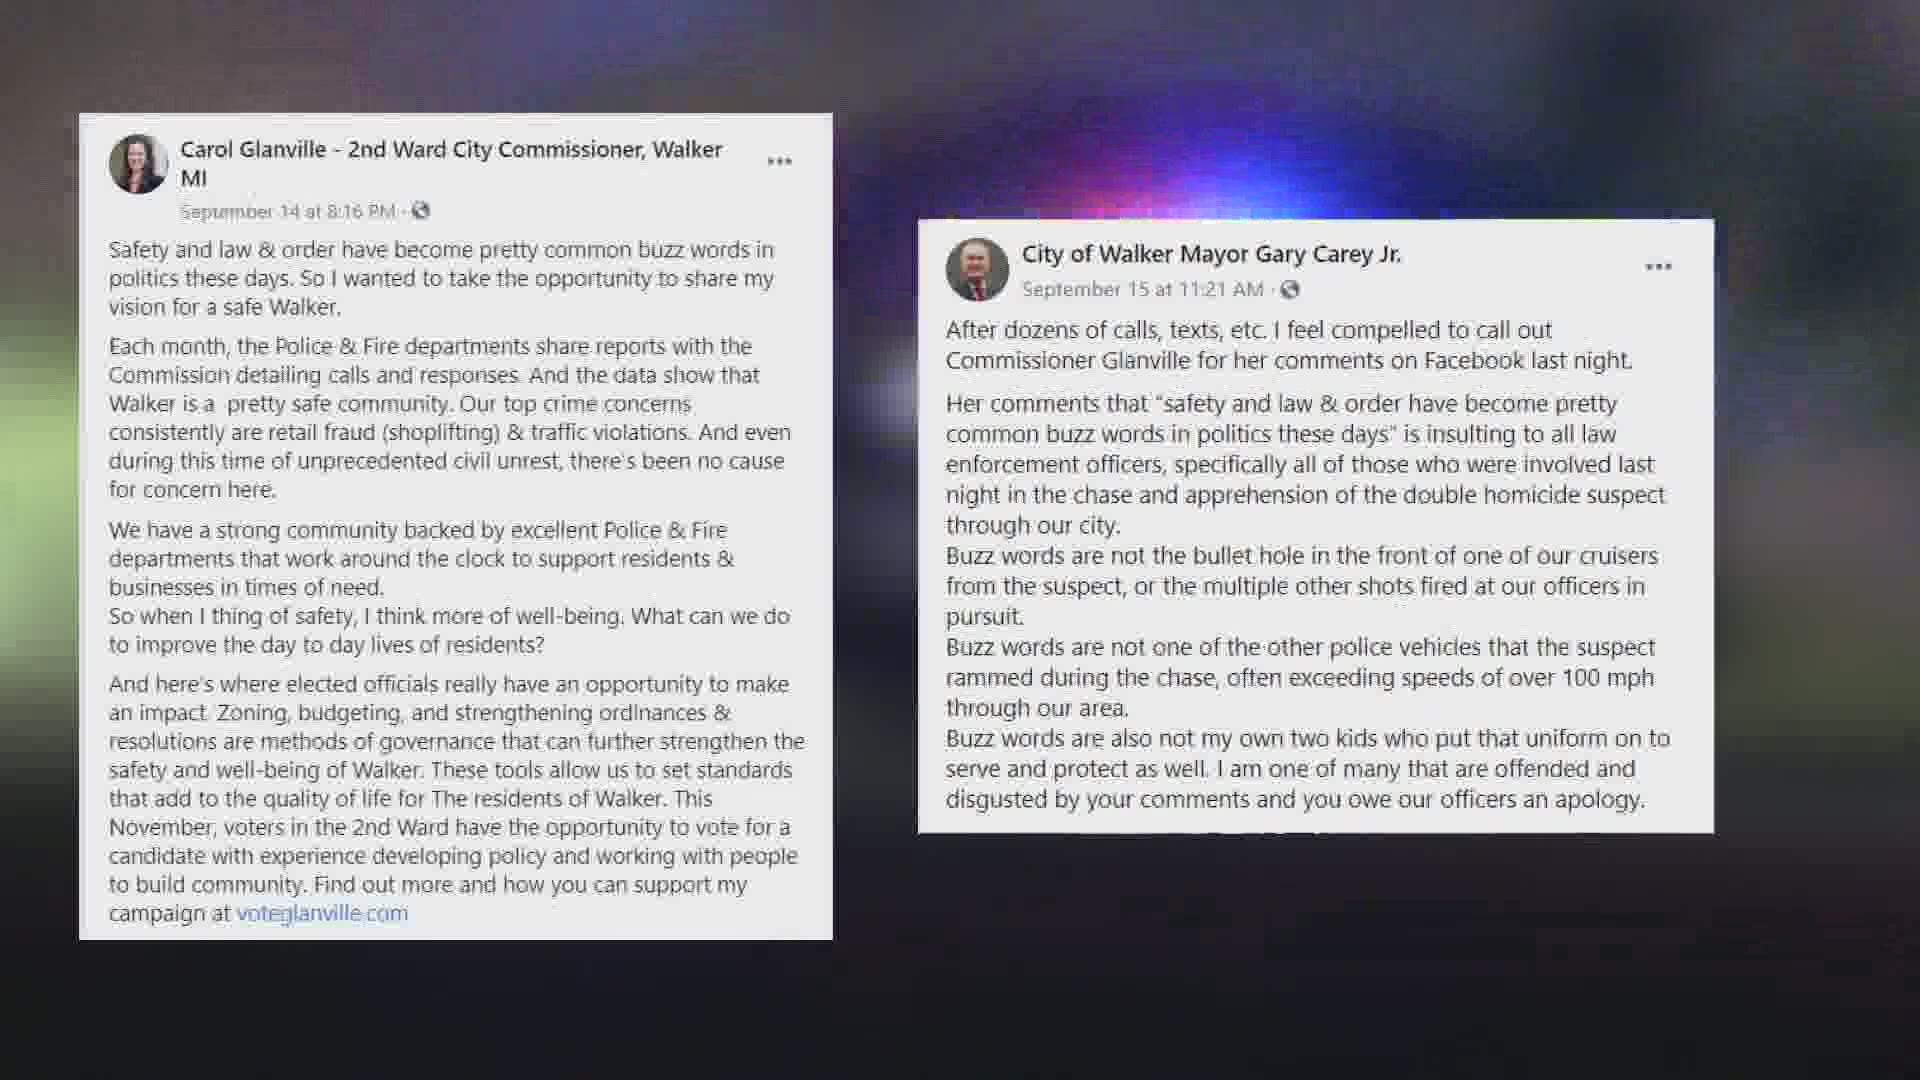 Not long after Glanville's post, Walker officers were fired at by a murder suspect, which prompted Carey's response Tuesday morning.